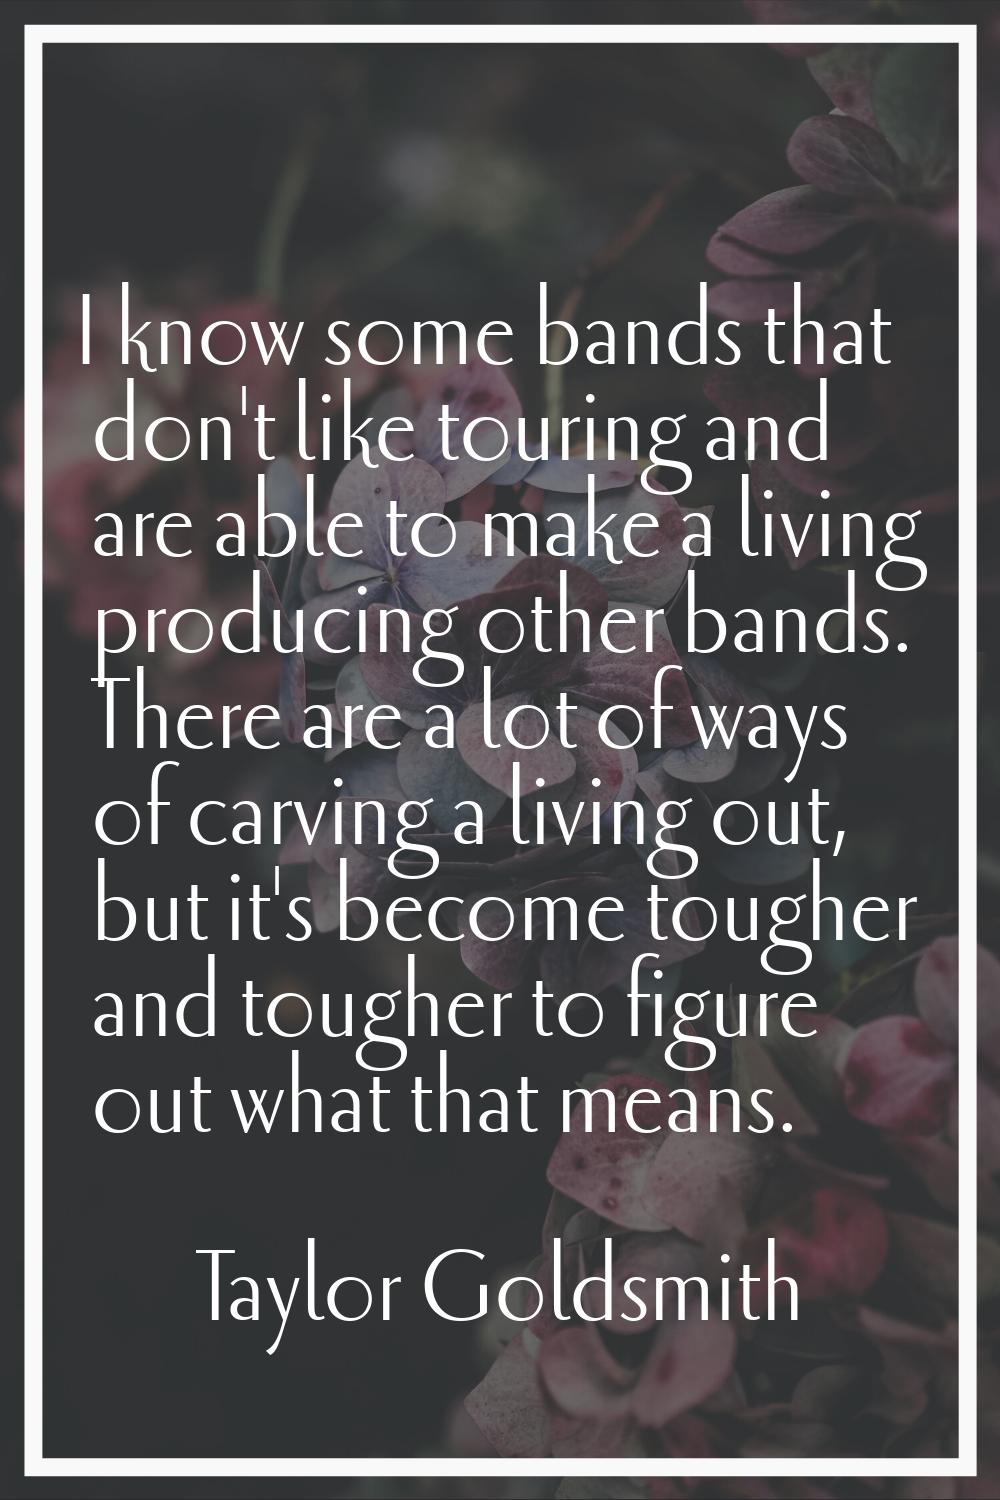 I know some bands that don't like touring and are able to make a living producing other bands. Ther